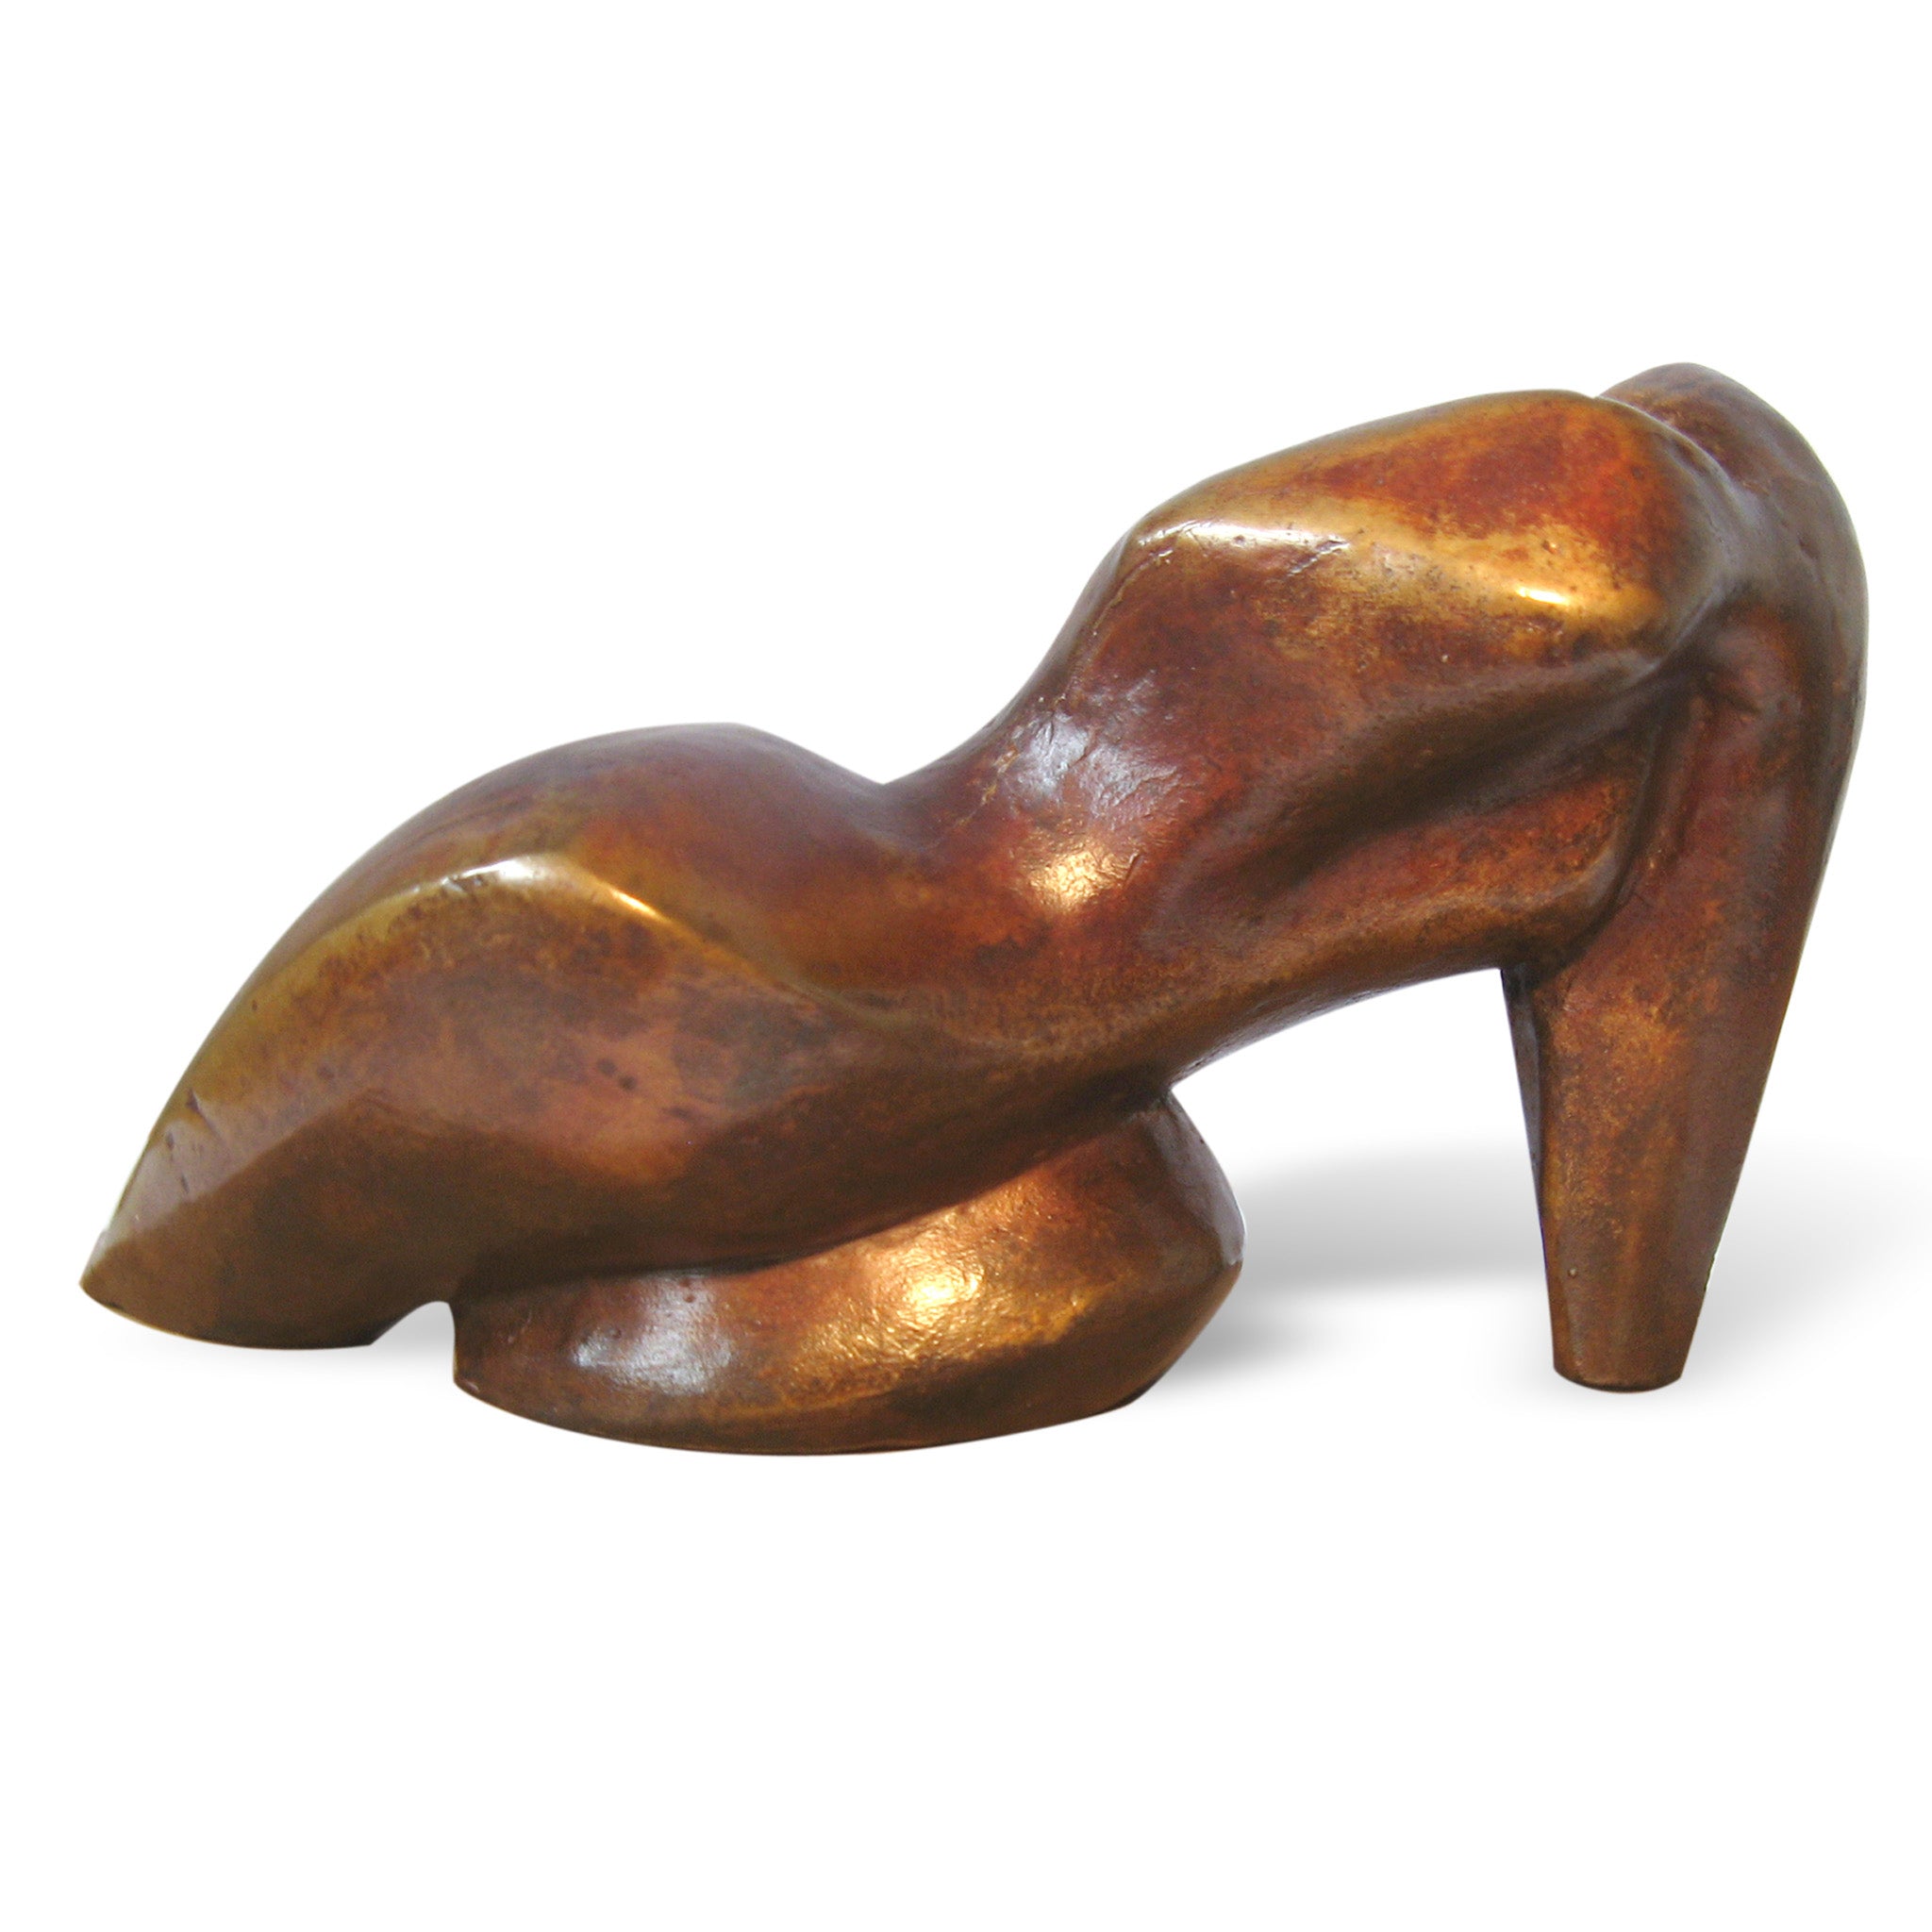 Reclining abstract female figurative bronze sculpture by Stephen Williams.